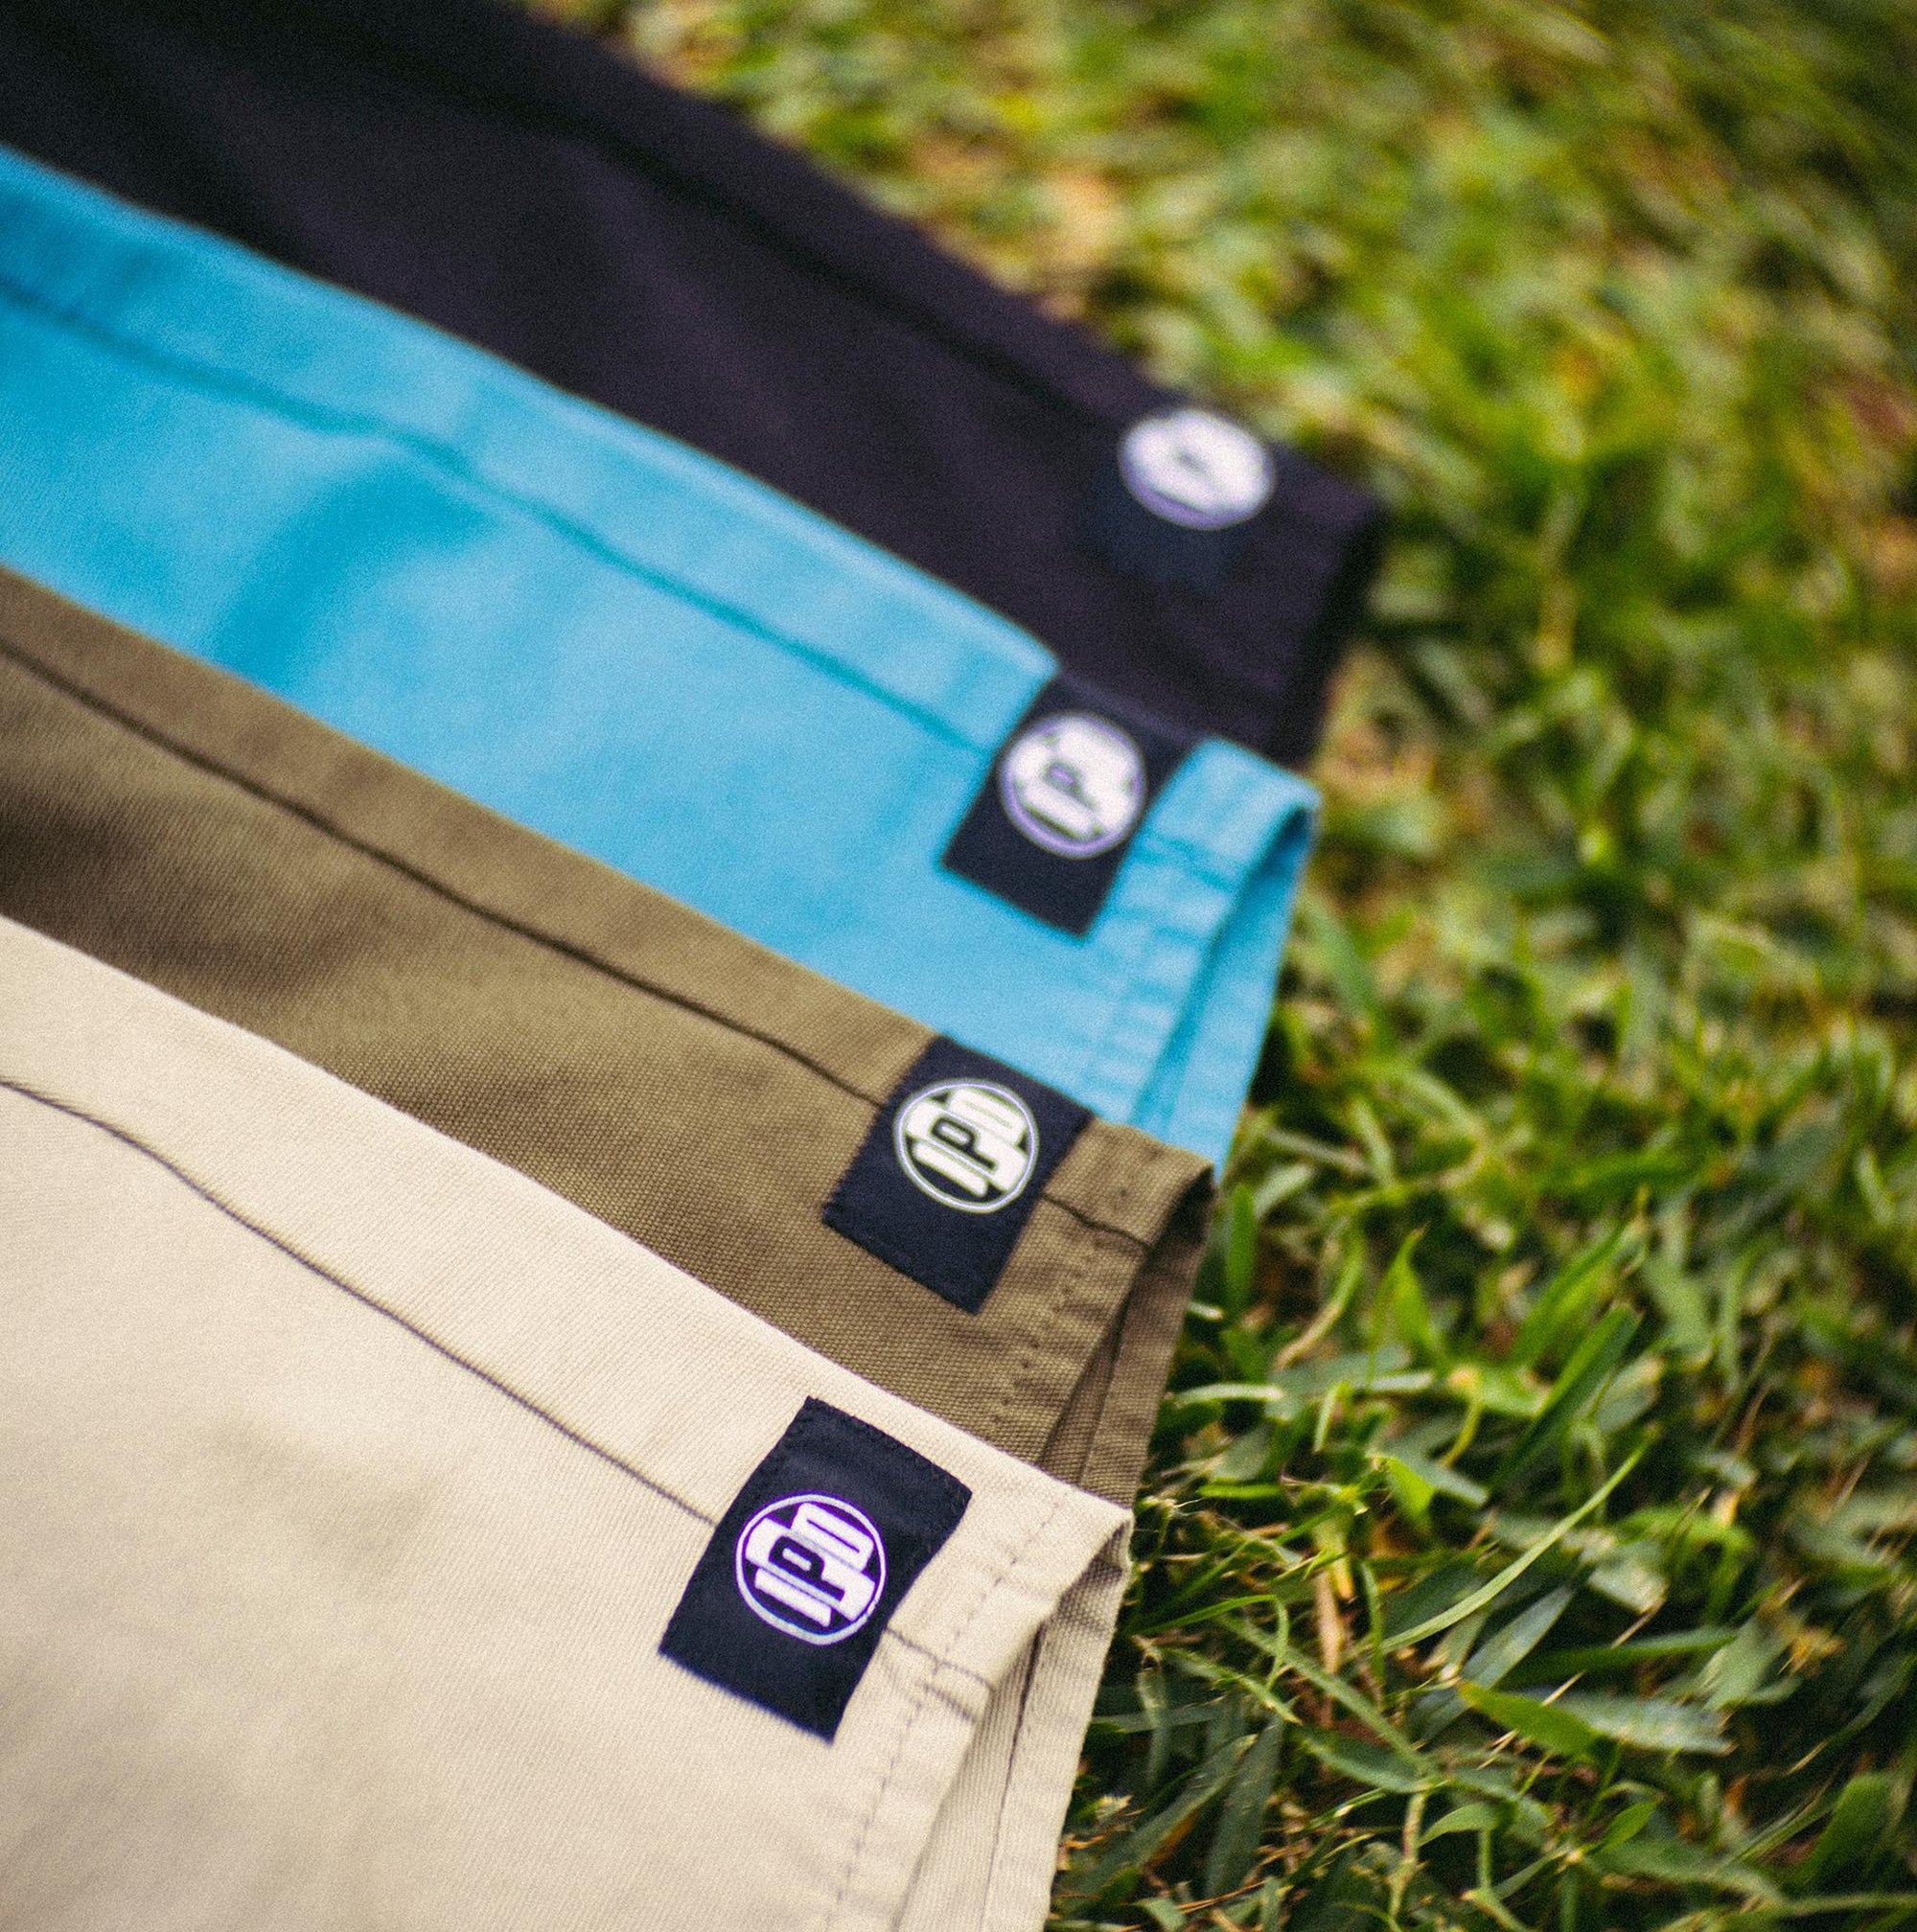 The Foundation Walkshort is a classic walkshort silhouette that comes in at a 17” length. It features a solid gray coloring, and features an elastic waistband and drawcord. The pocketing is two side pockets and two back patch pockets. It features the signature smaller IPD flag label on the lower left leg.